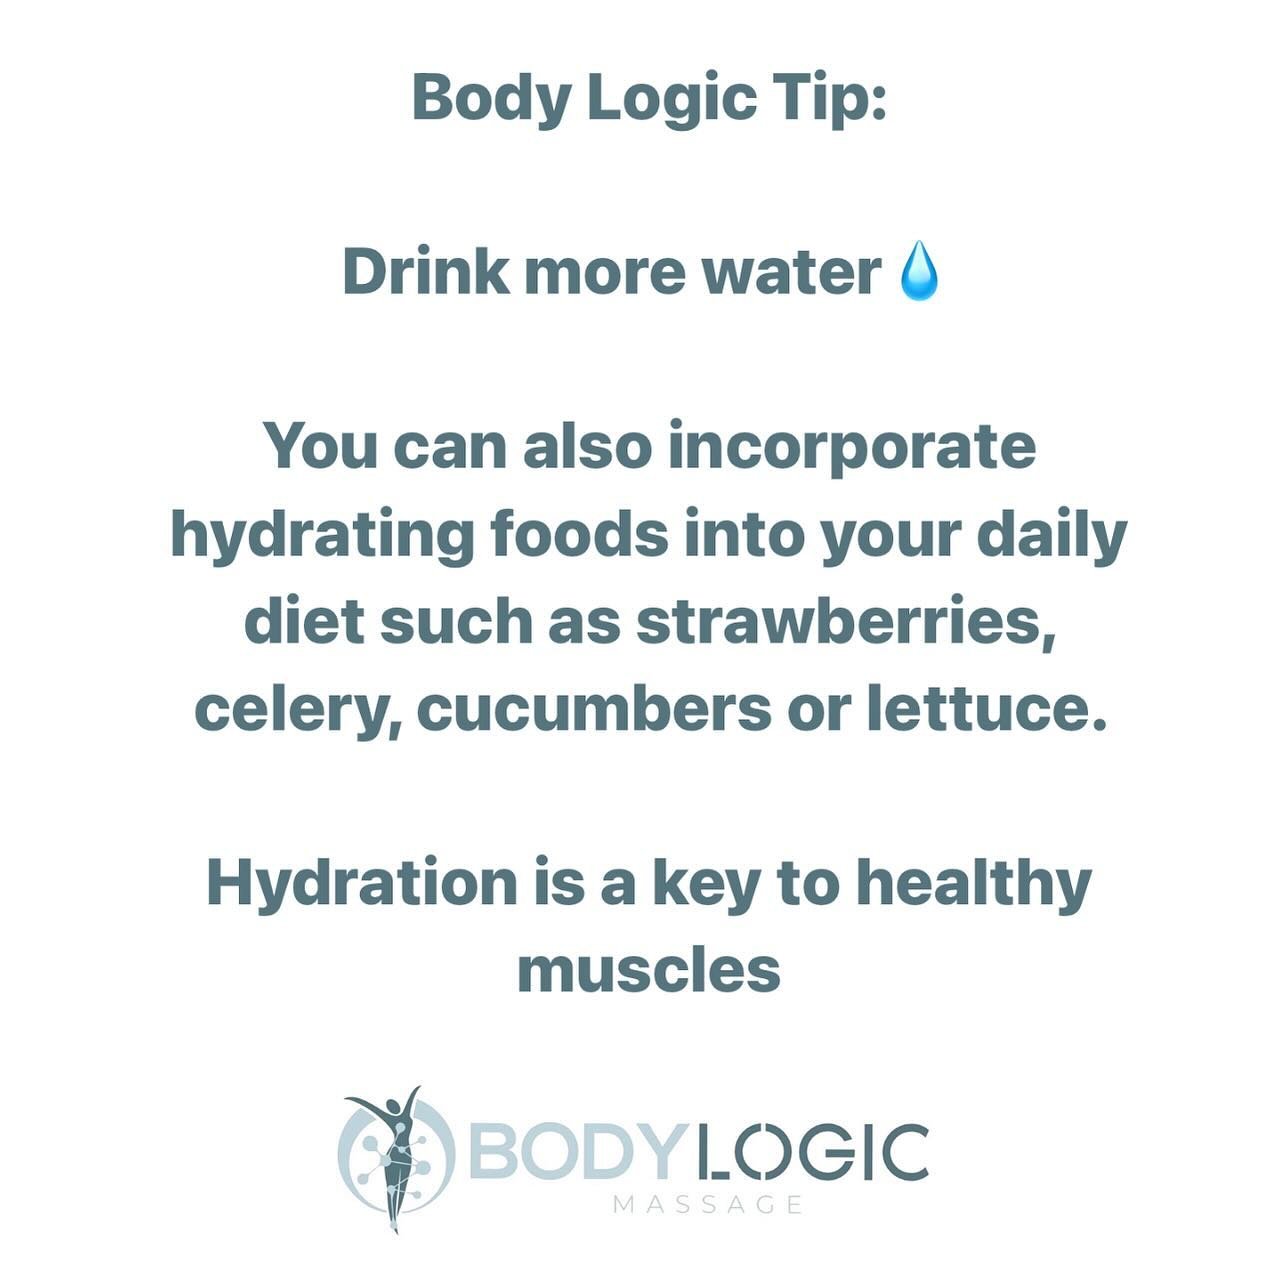 Keep your muscles strong and supple by staying hydrated! Hydration helps transport nutrients to your muscles, improves their performance, and speeds up recovery.

#bodylogic #healthtips #hydration